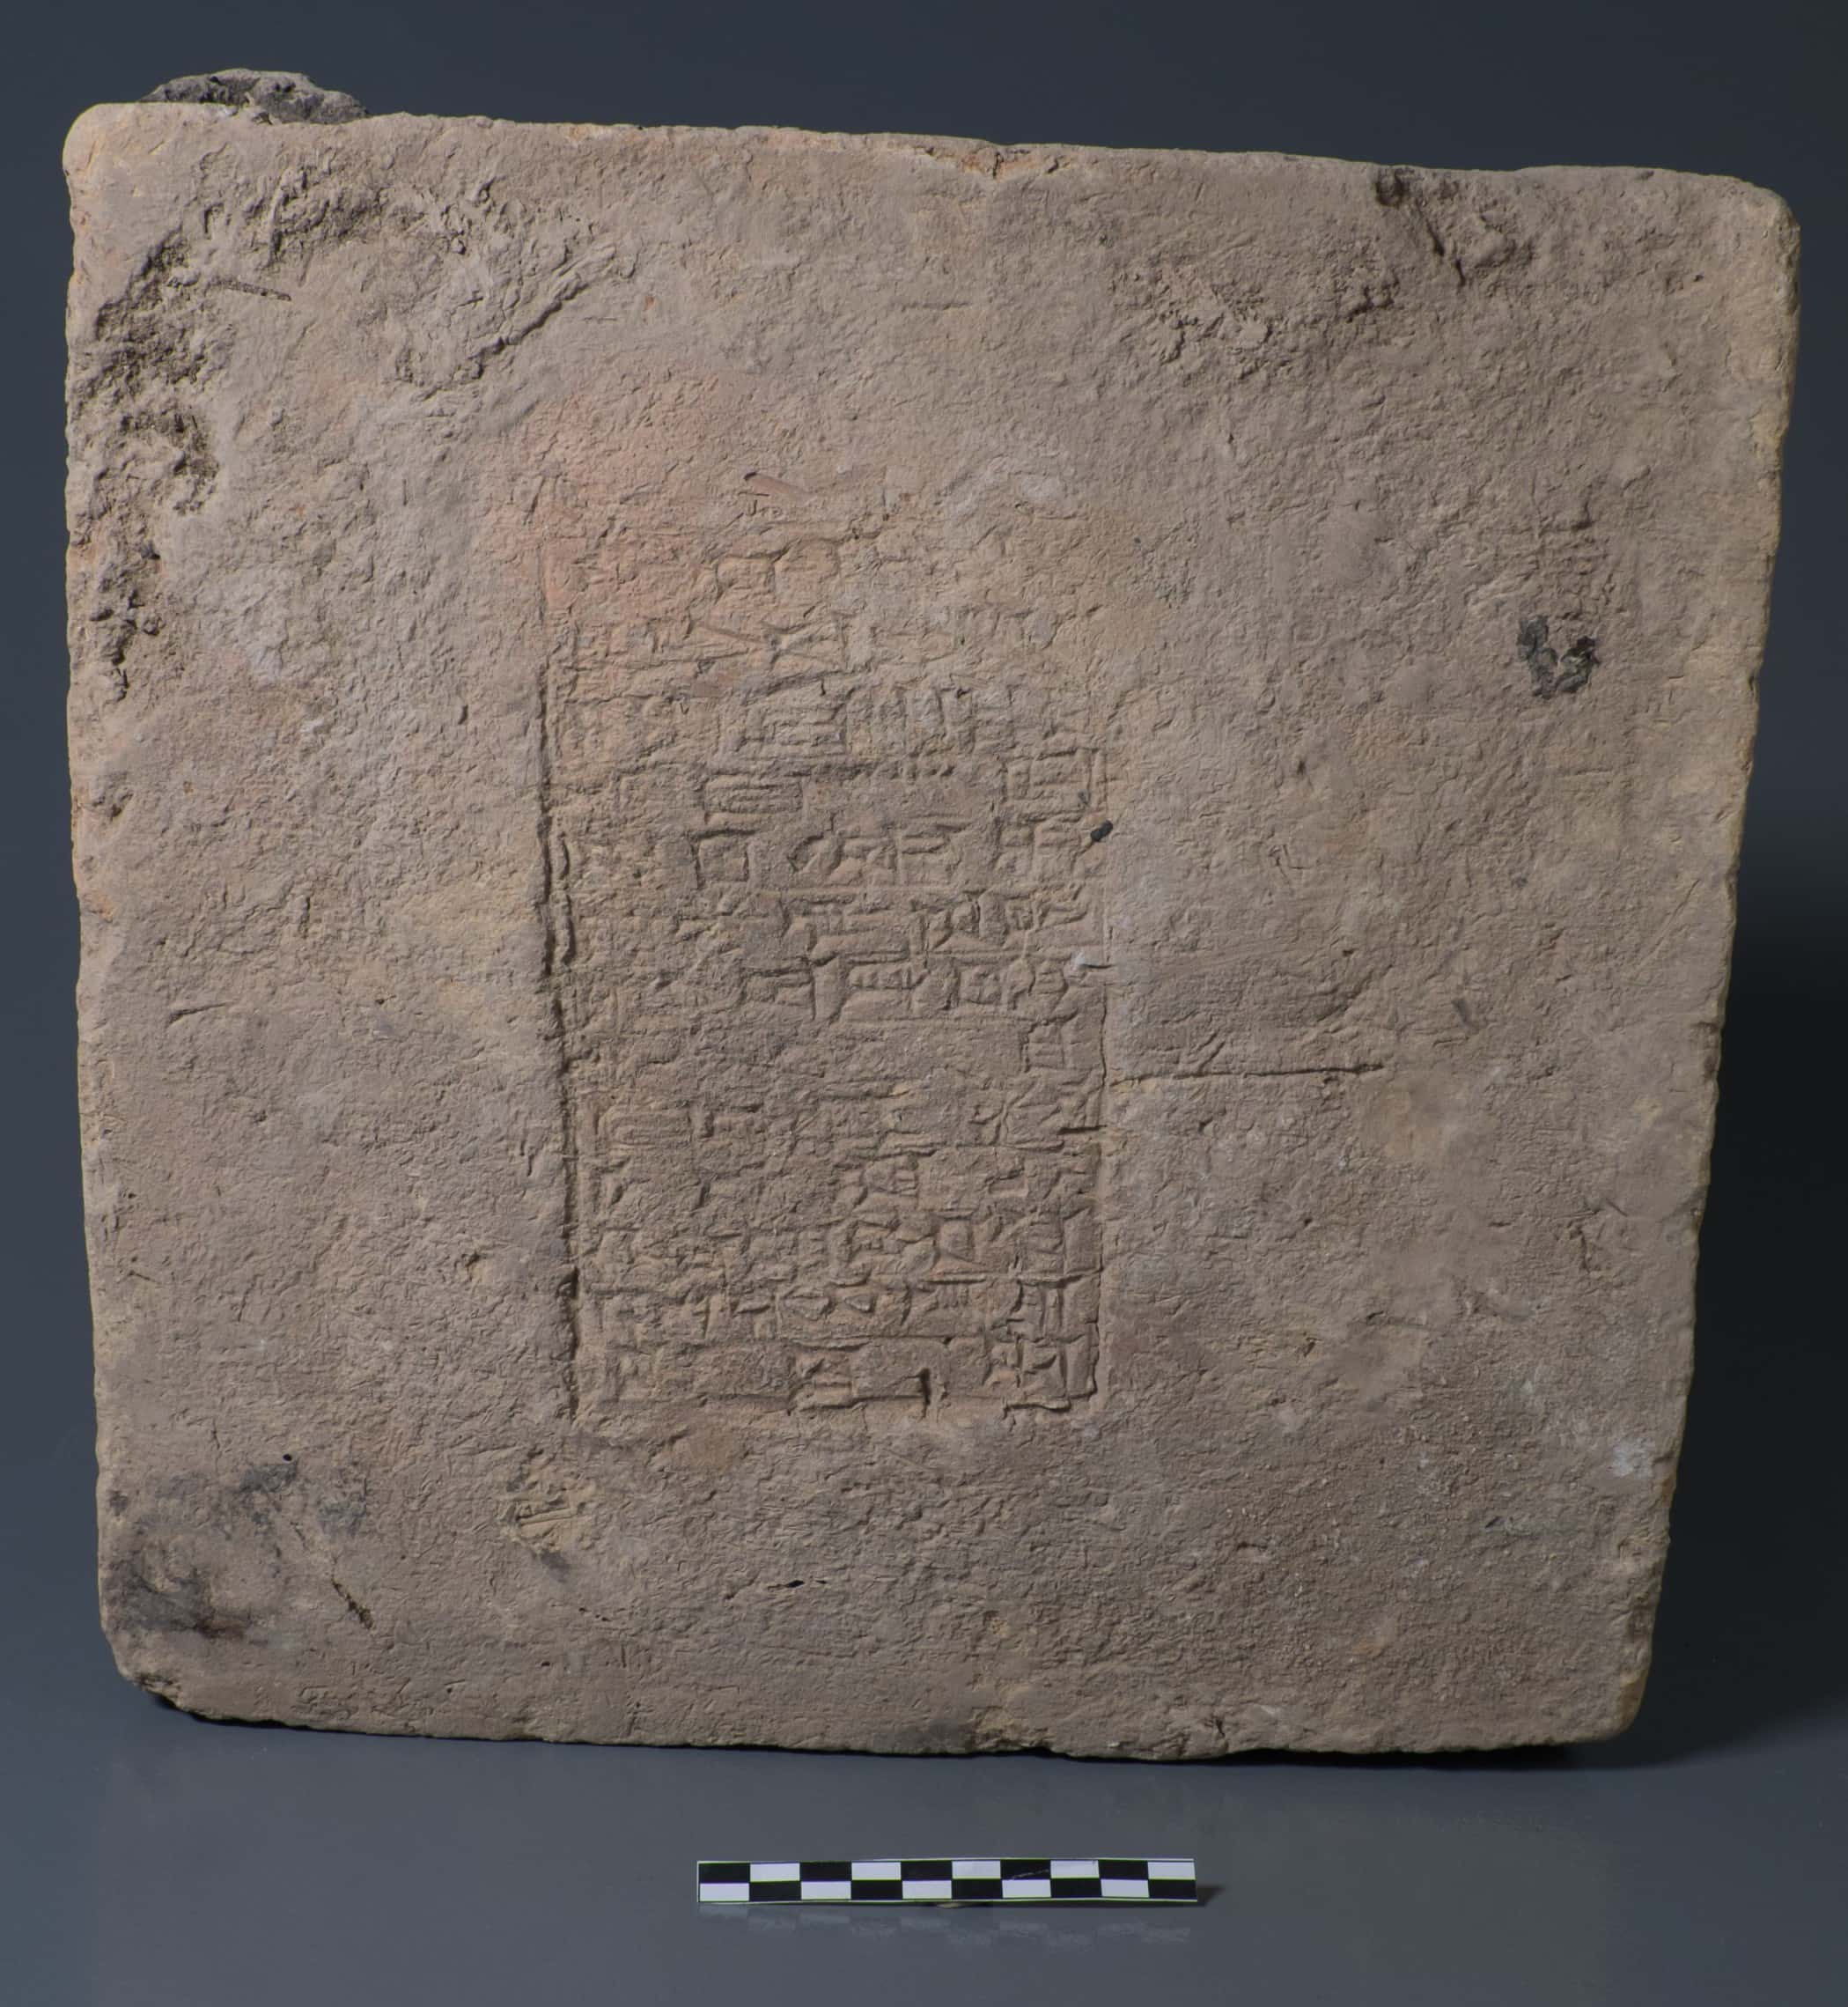 An ancient mesopotamian tablet